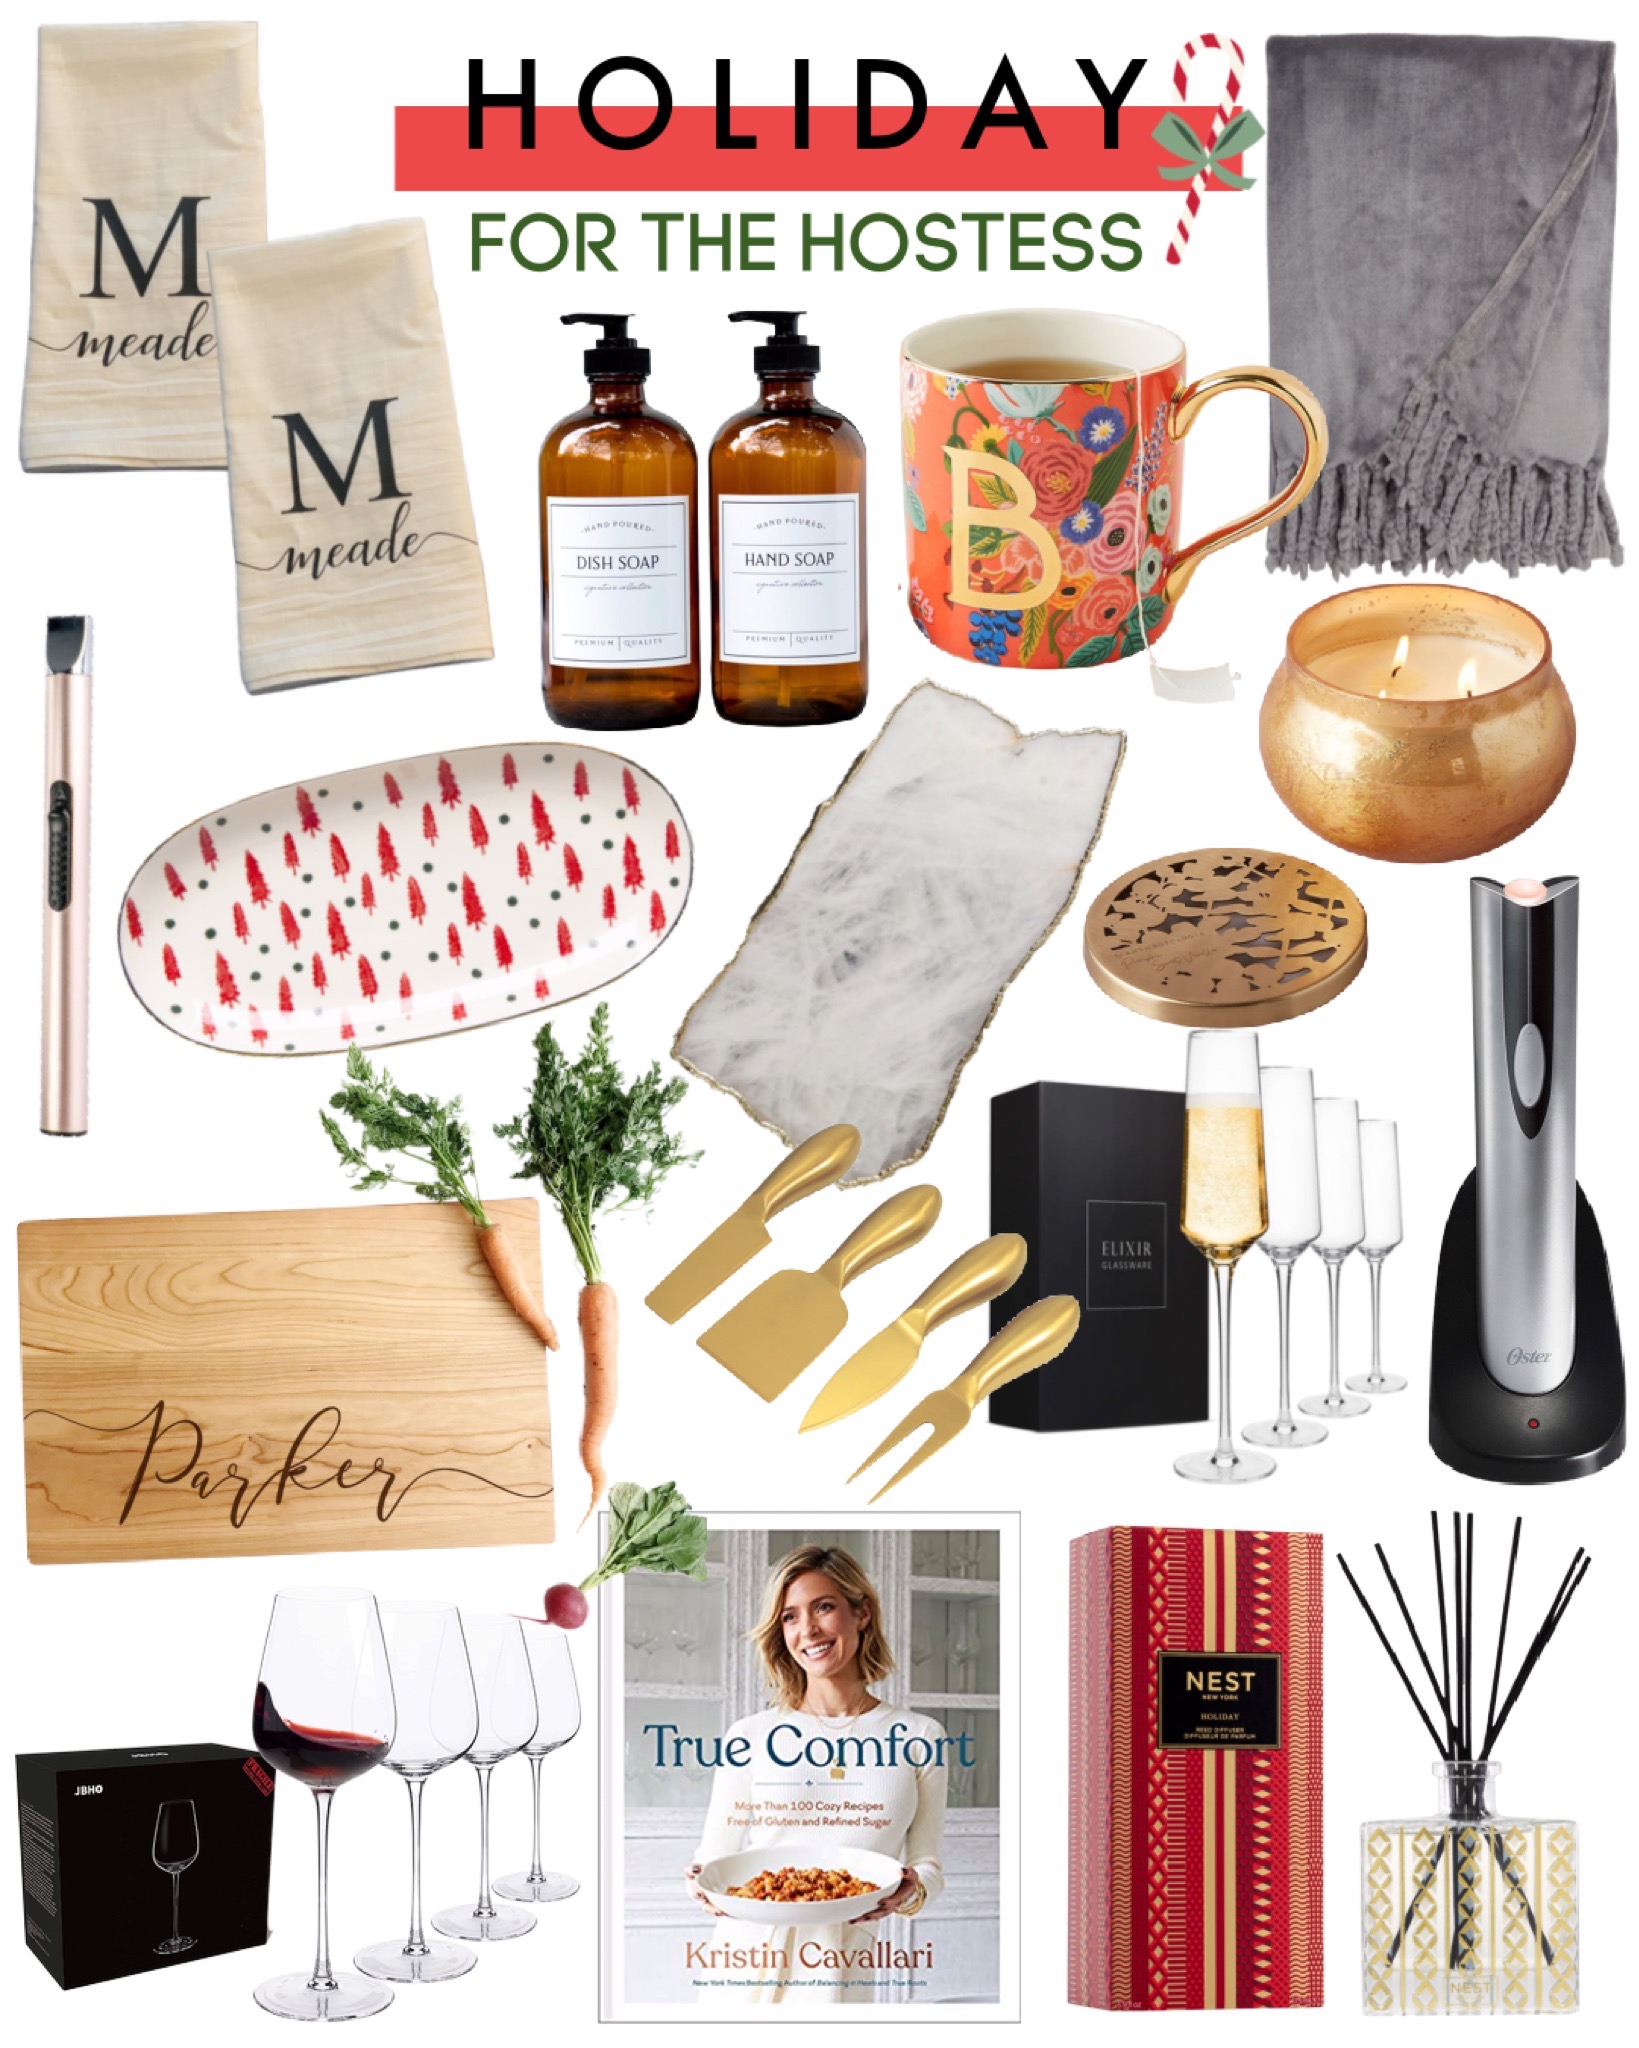 Christmas Gifts: 25 Under $25 - The Sister Studio